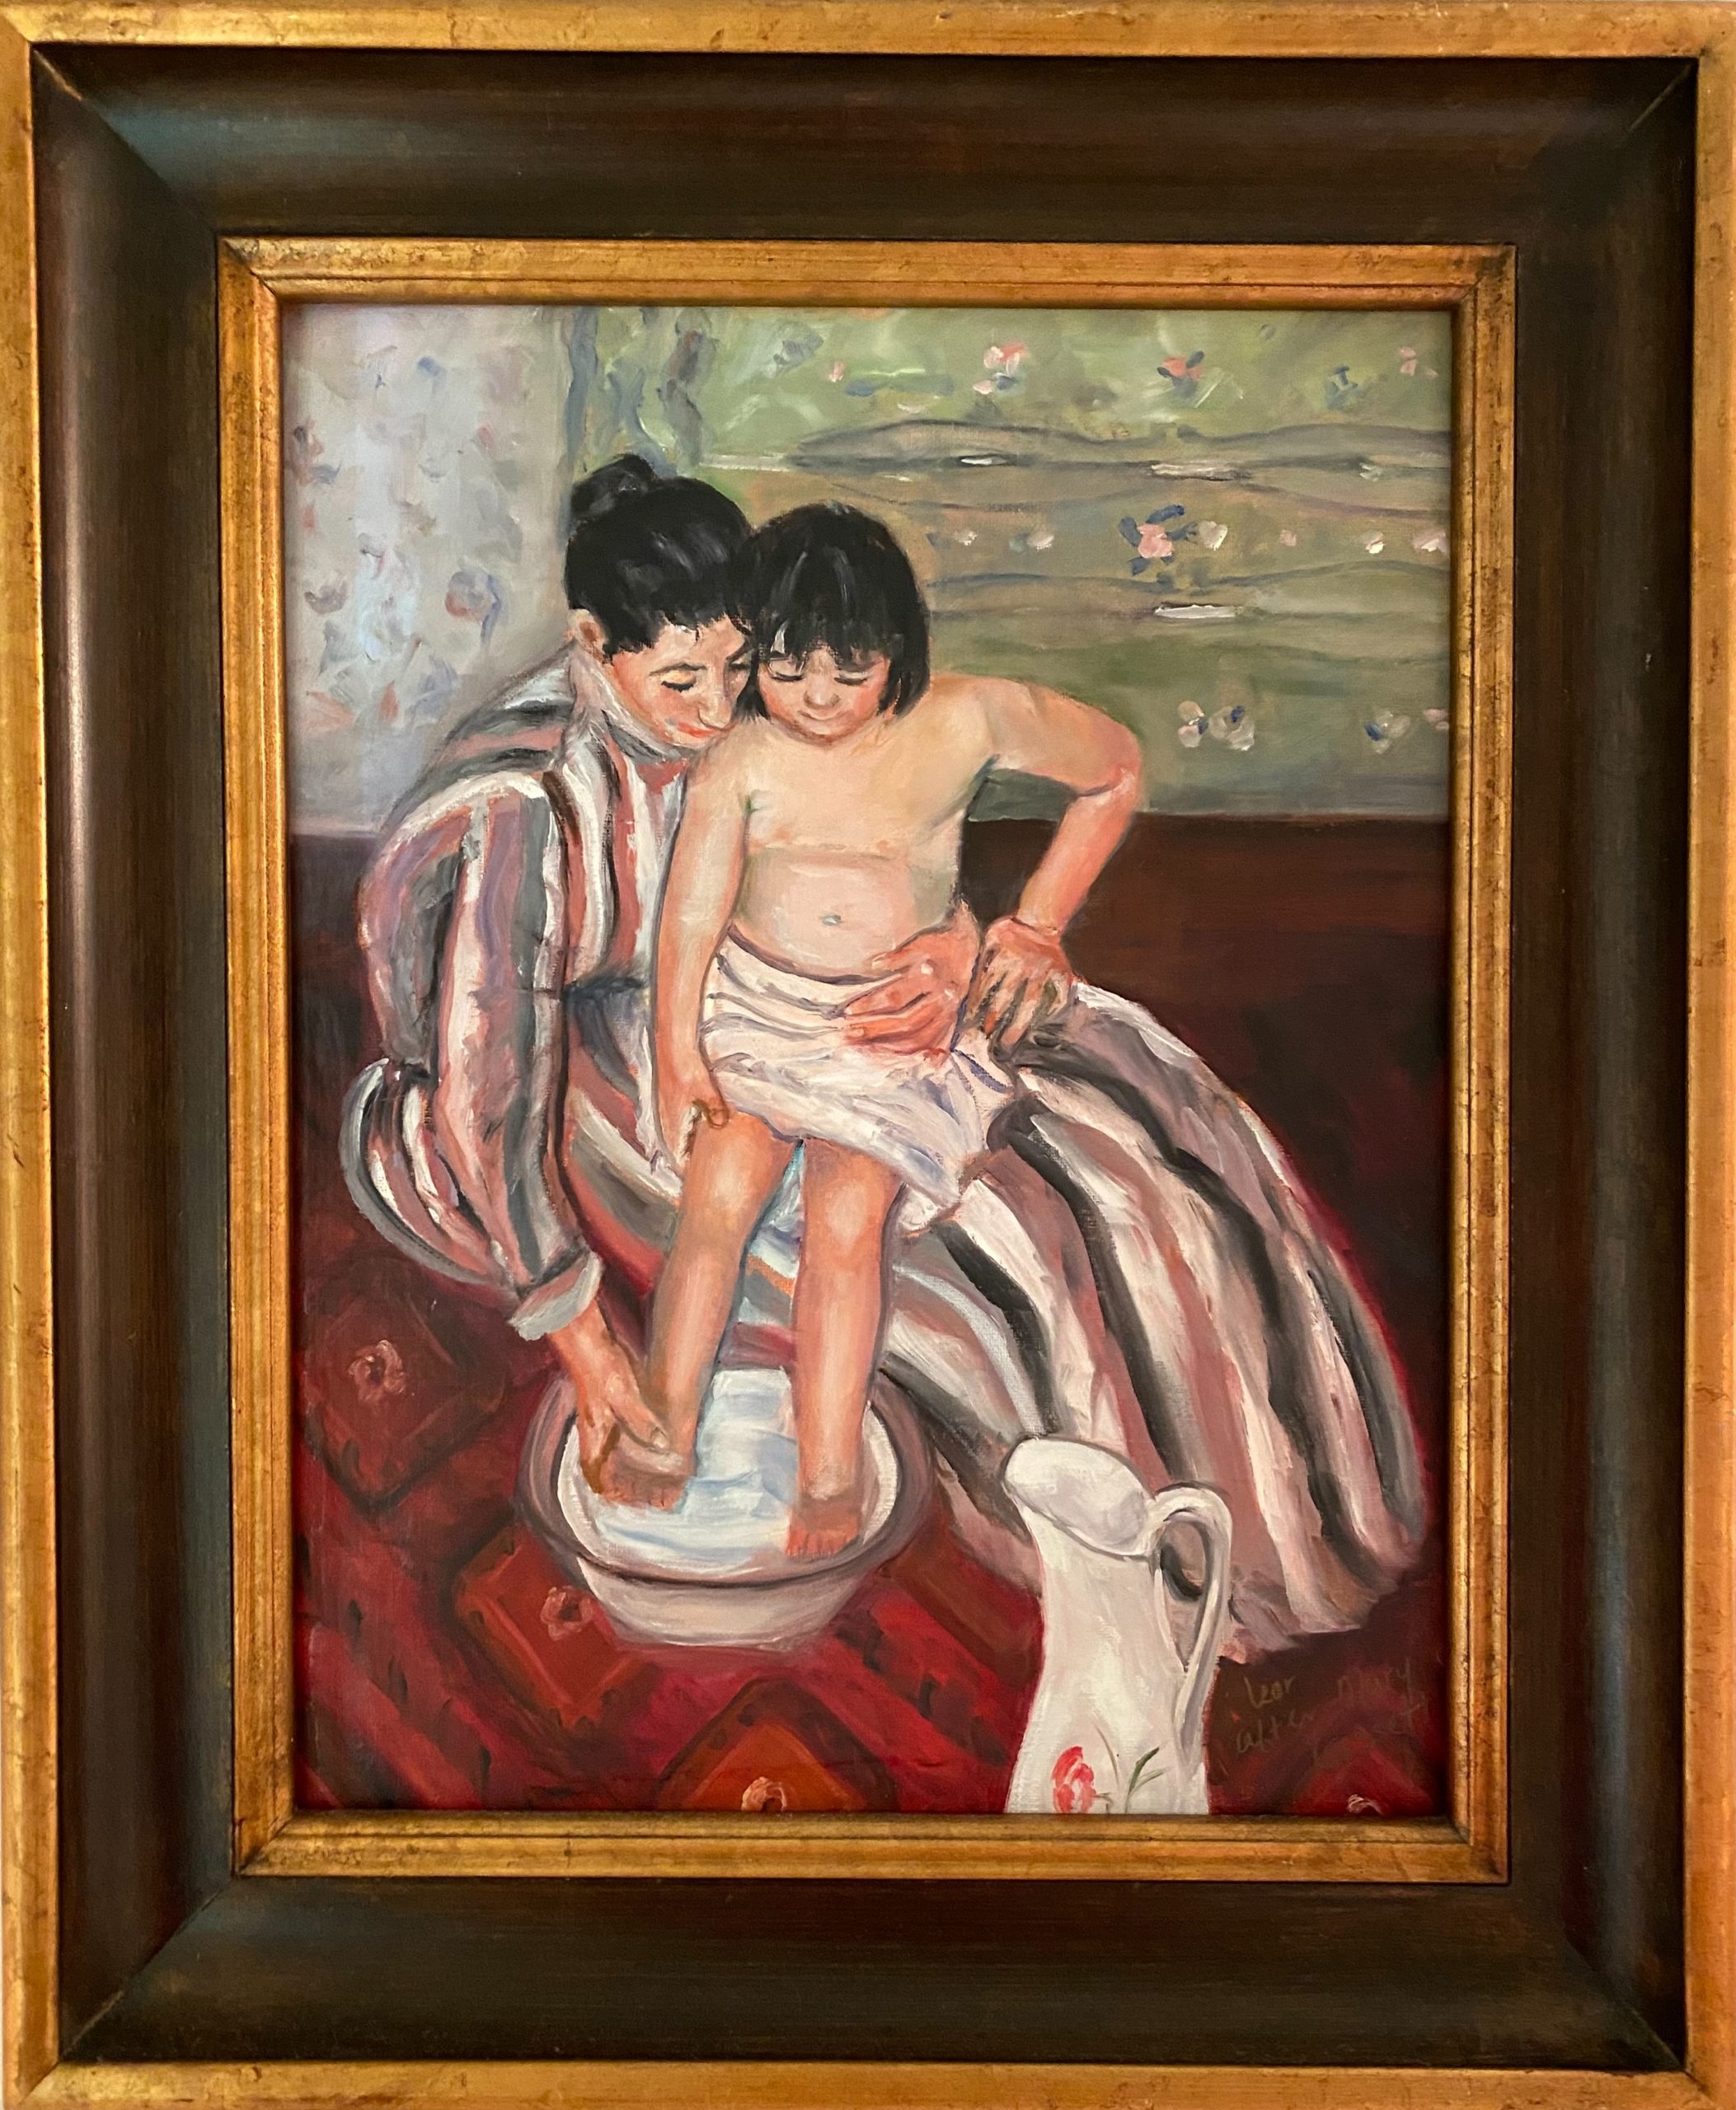 Paintings of mothers - Copy of Mary Cassatt's The Child's Bath painting